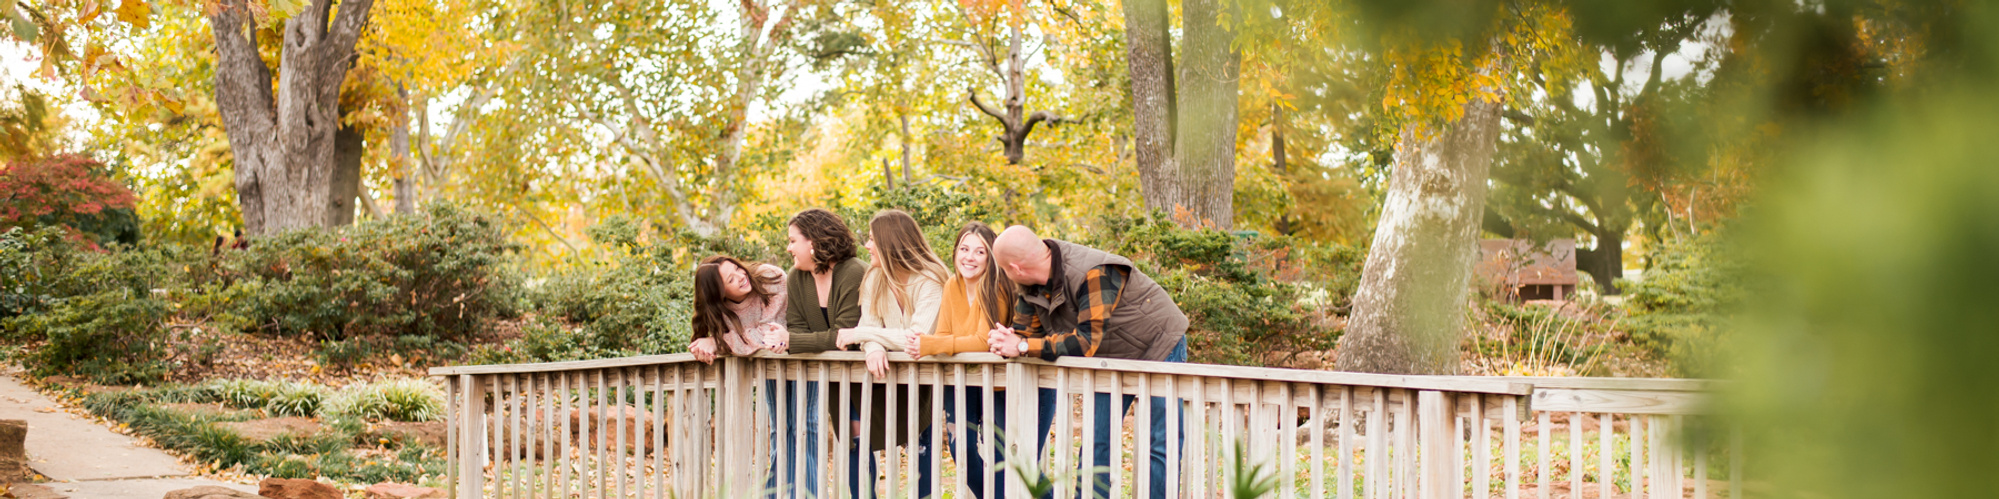 wide angle shot of a mom and dad with their 3 teenage daughters standing on a foot bridge and talking with fall foliage and trees all around them at Will Rogers Gardens in Oklahoma City